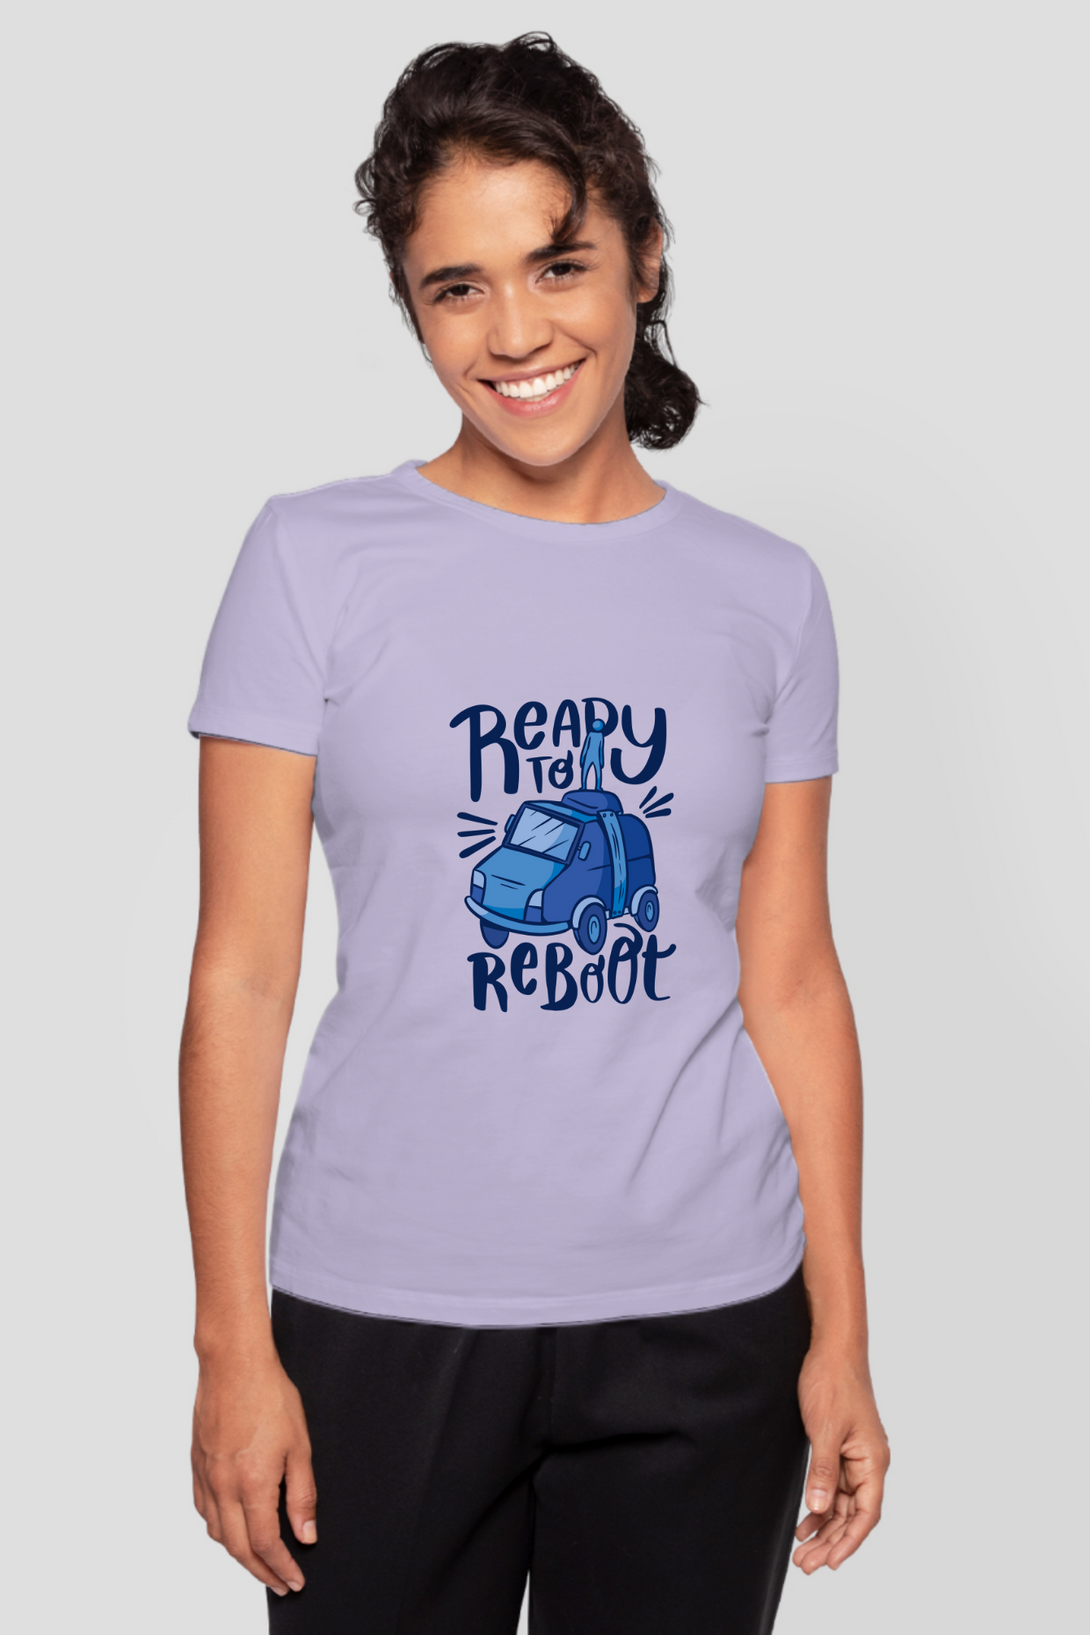 Ready To Reboot Printed T-Shirt For Women - WowWaves - 10